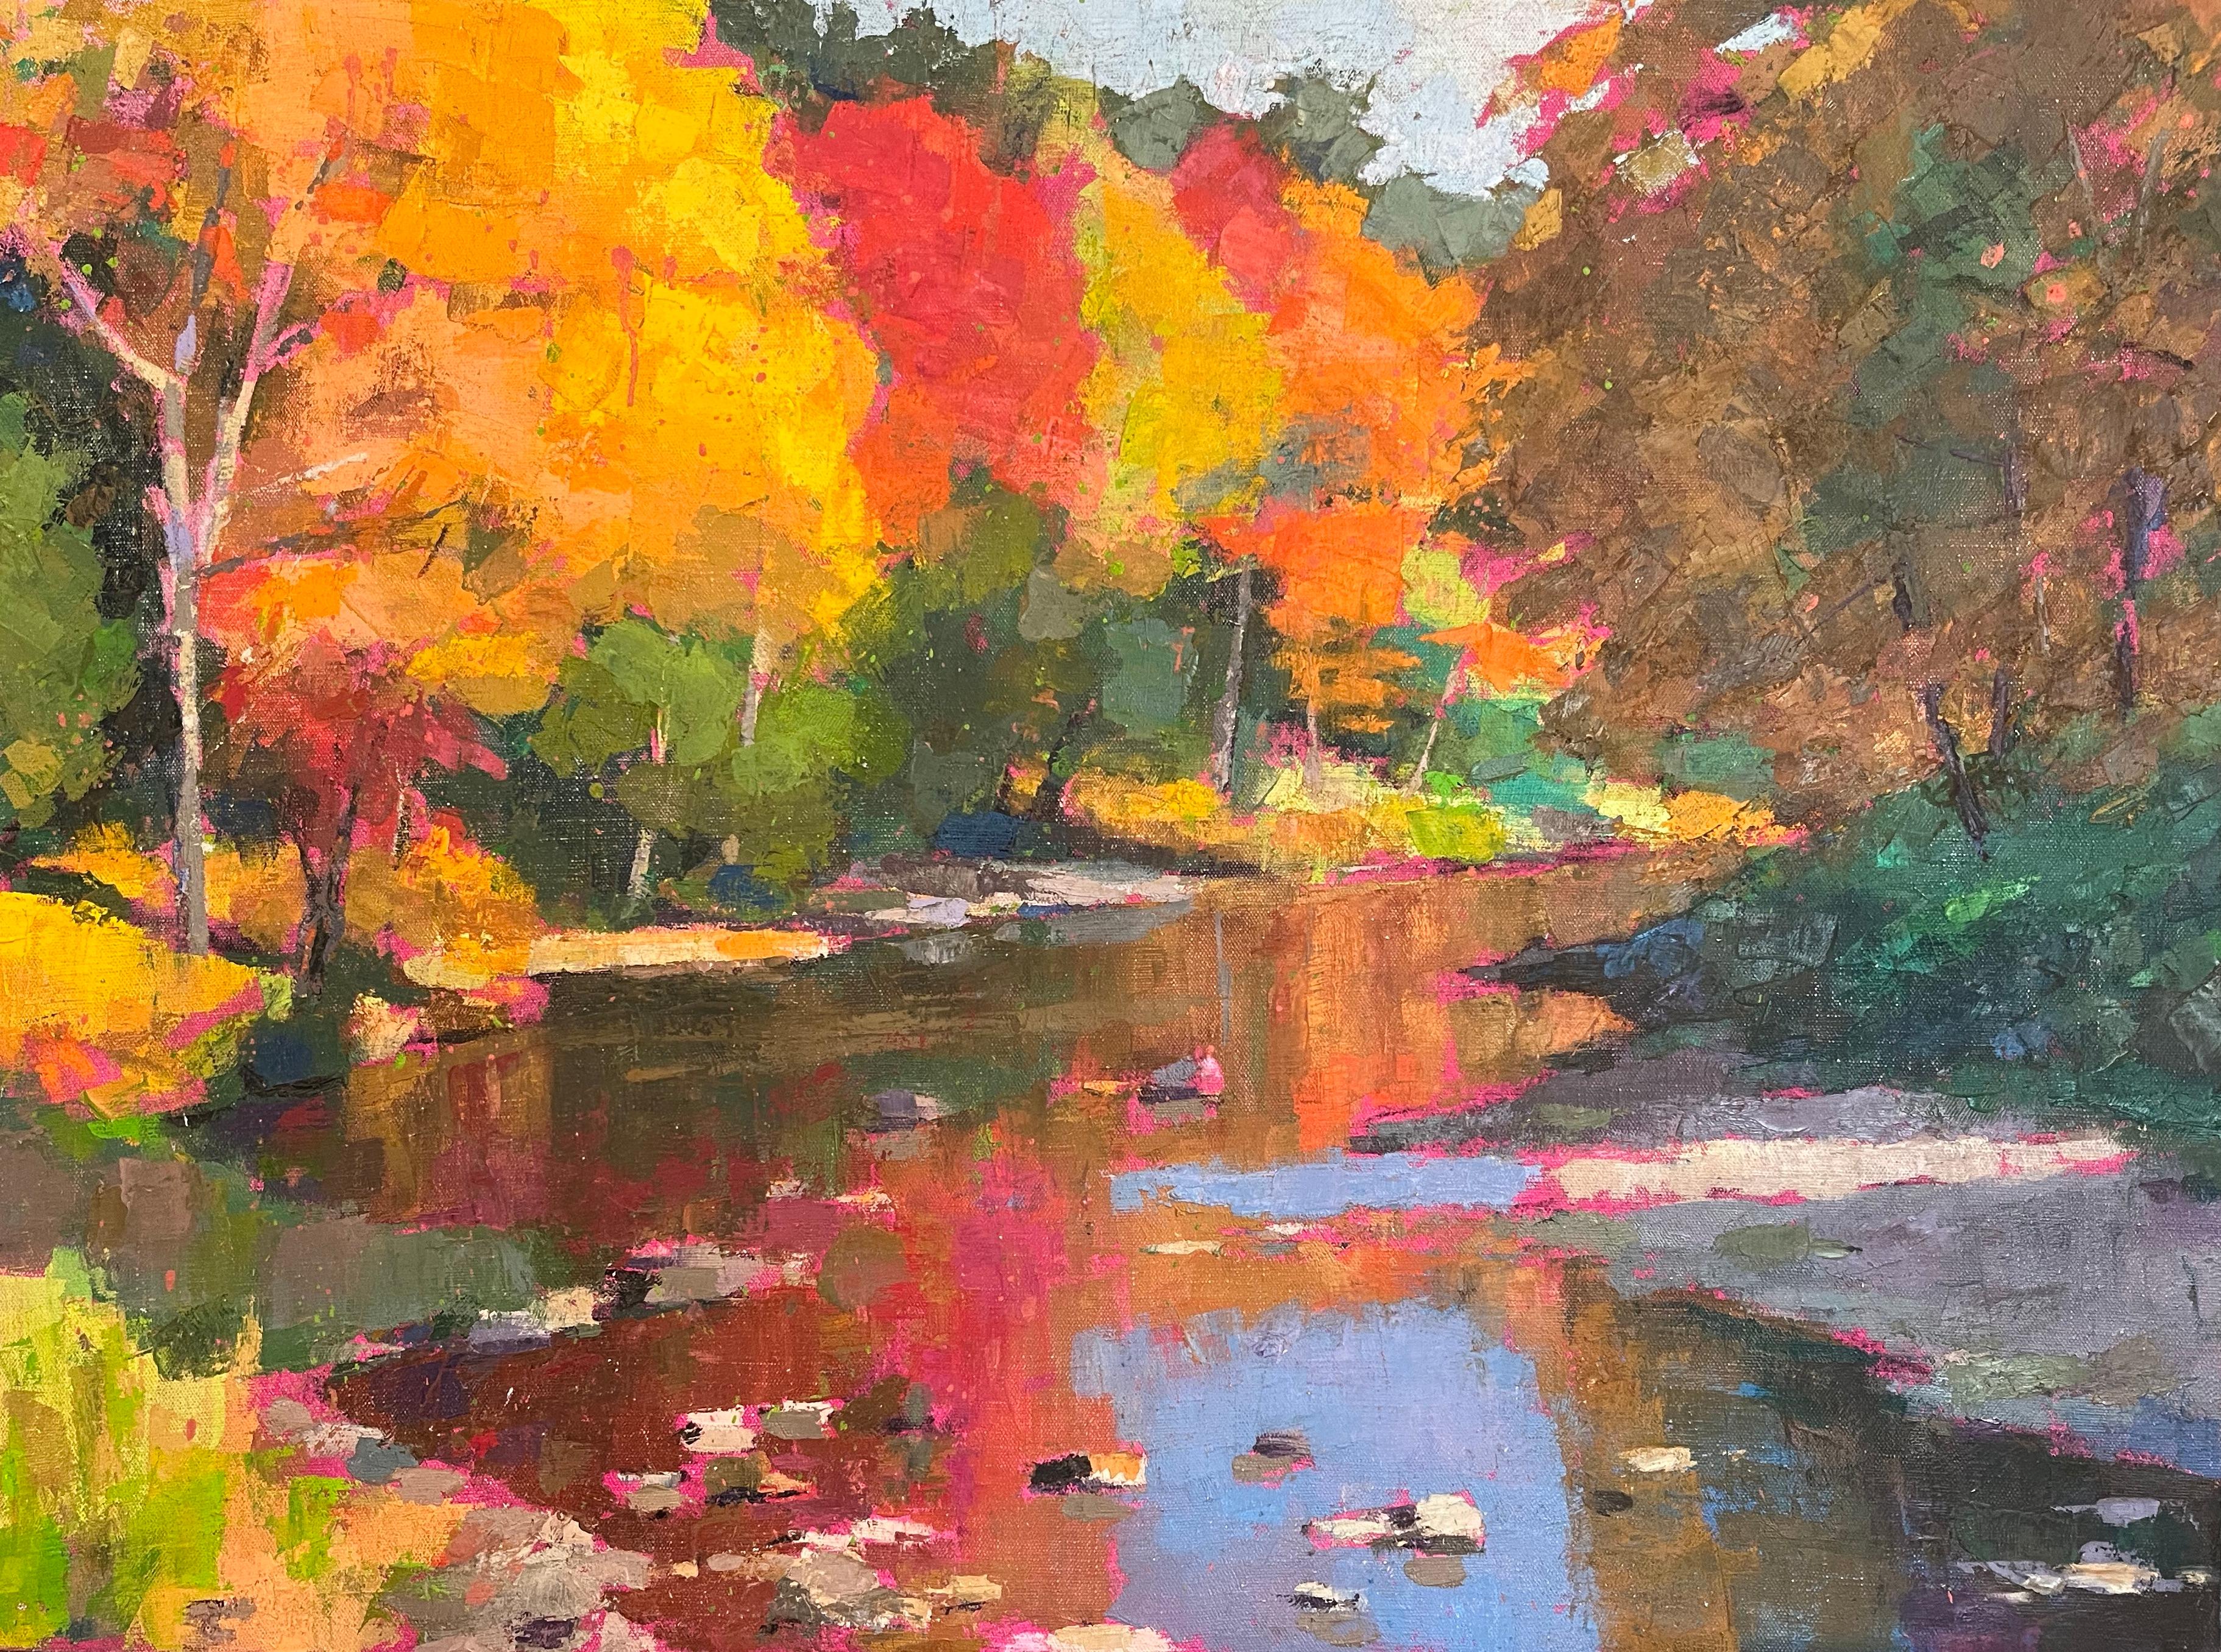 Larry Horowitz Landscape Painting - "Fall Stream Reflections" oil painting of woods with orange and yellow foliage